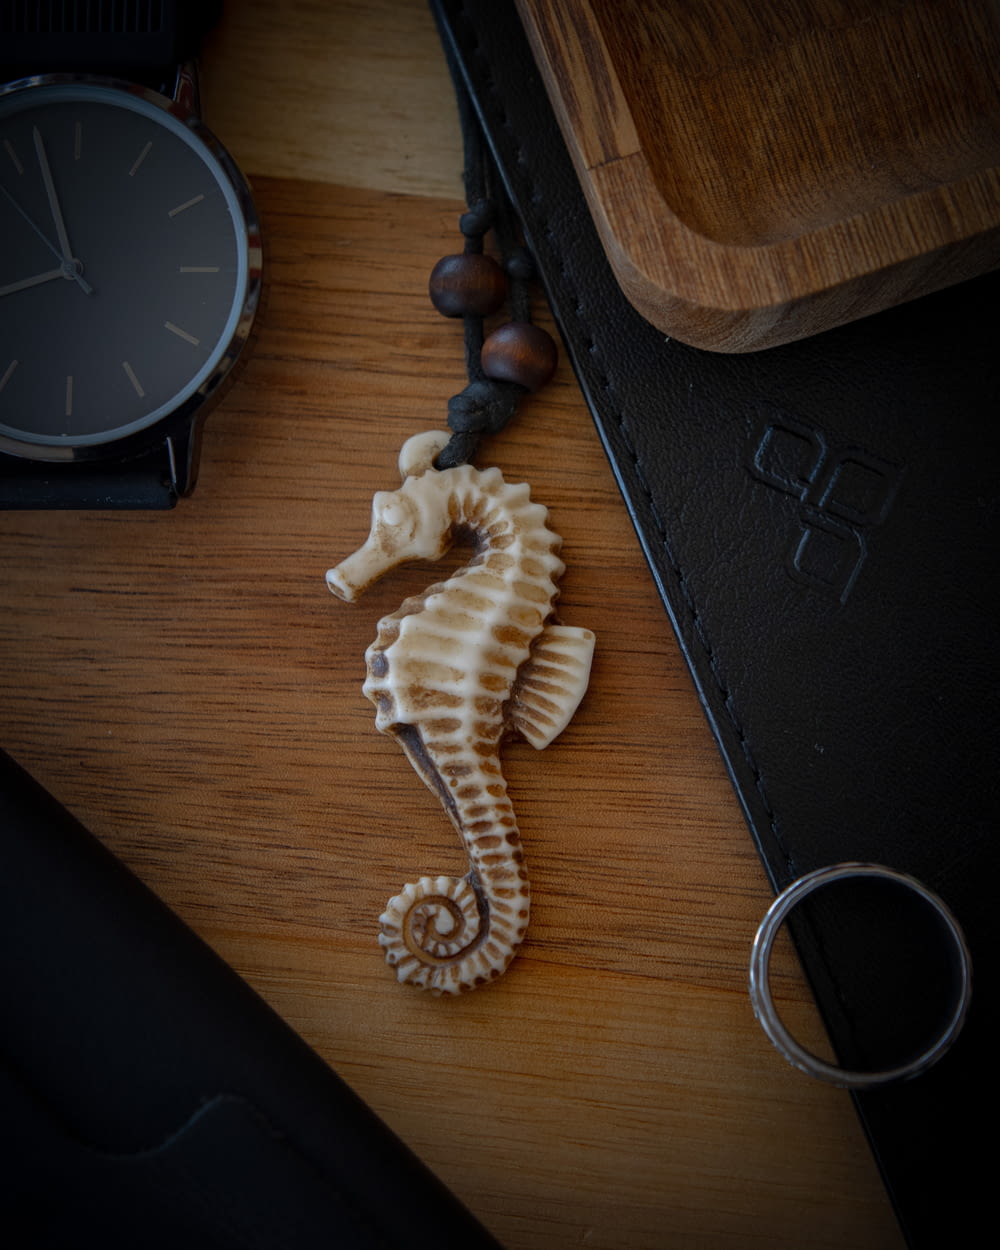 a sea horse on a wooden table next to a watch